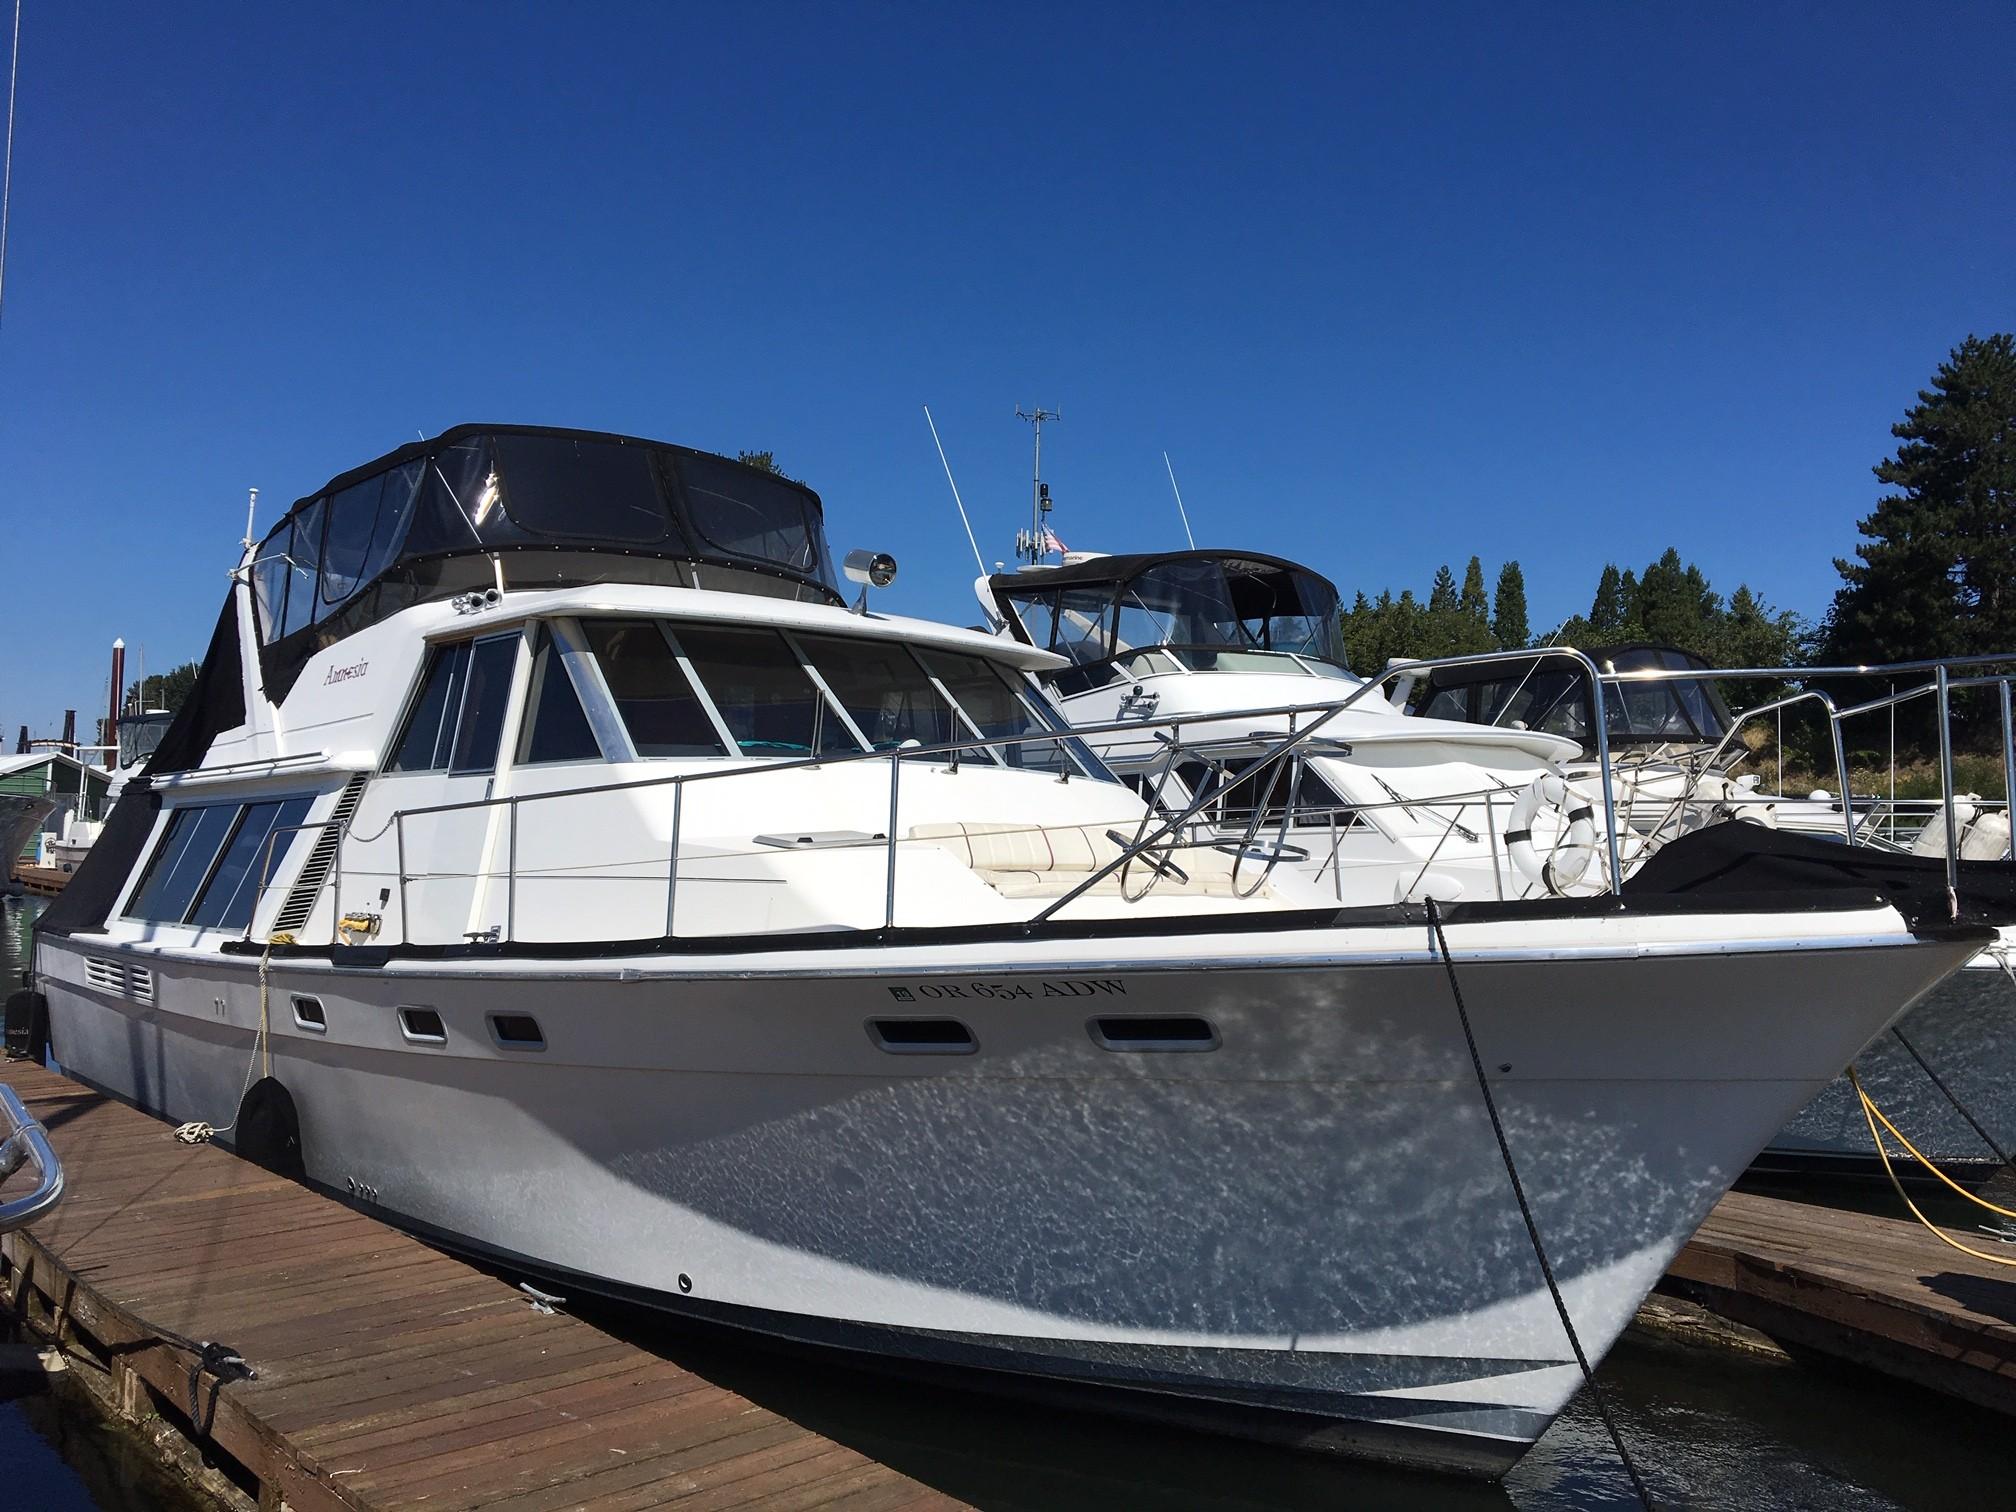 yachts for sale in portland or